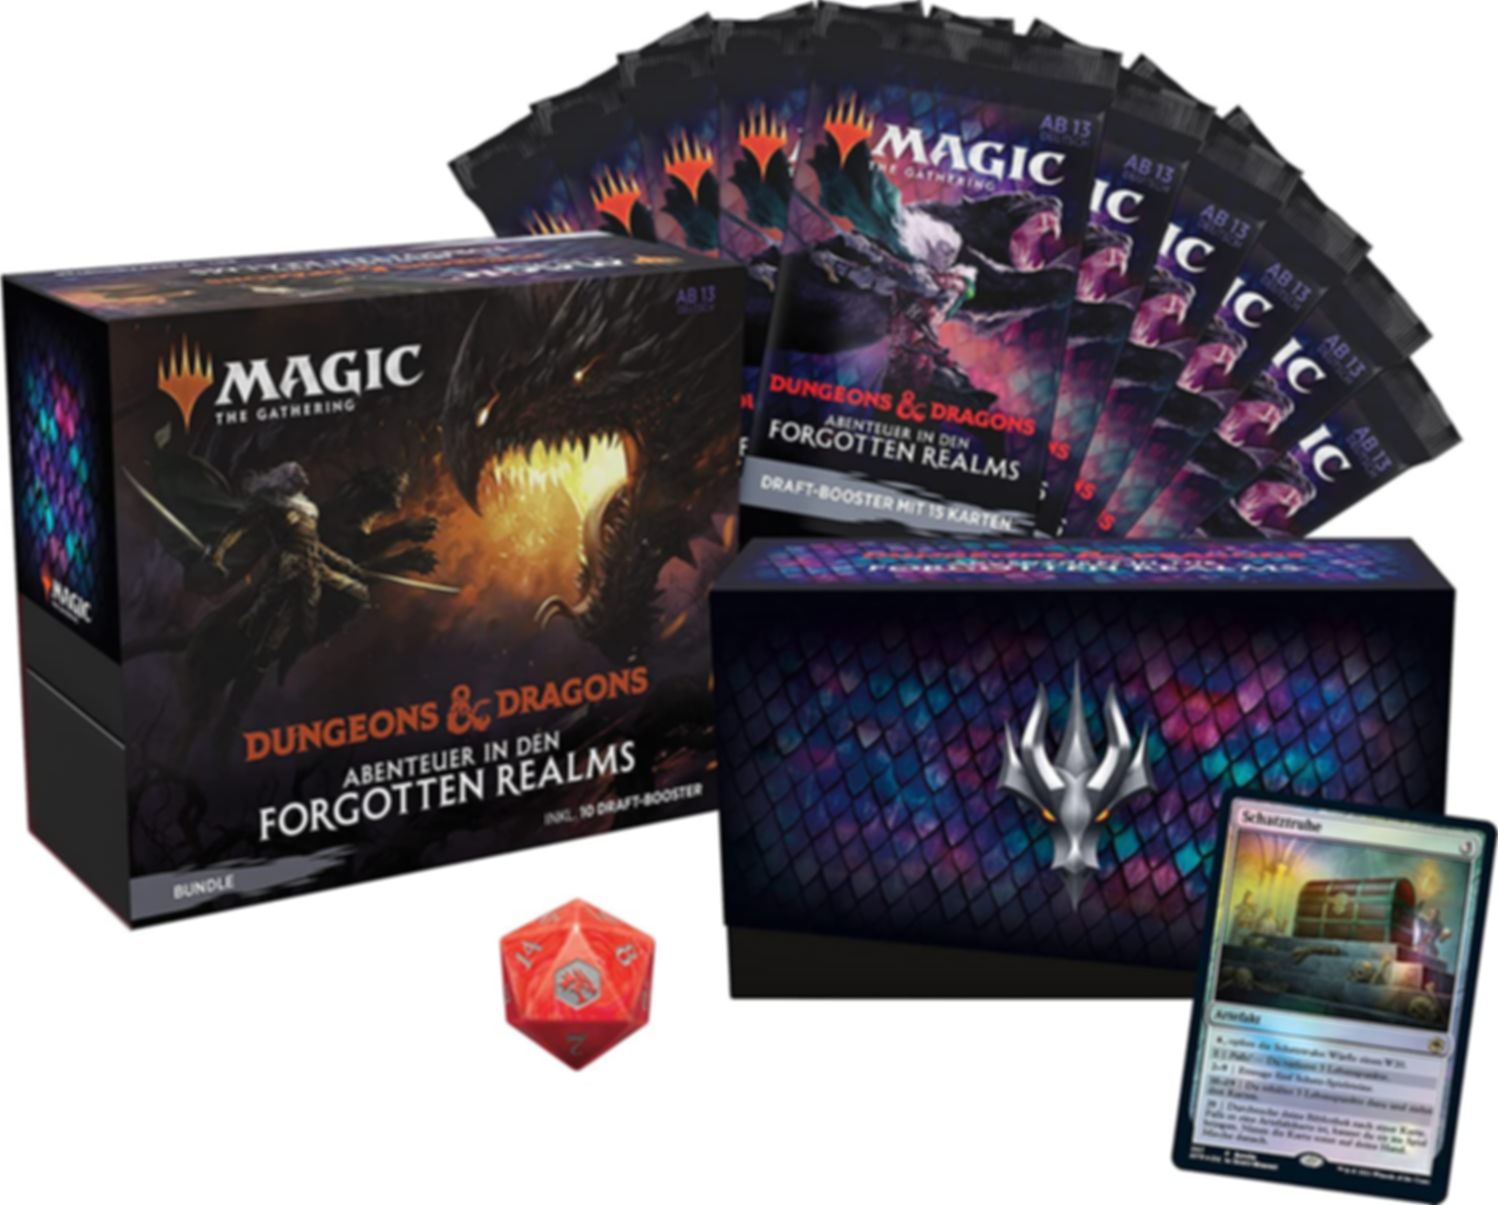 Magic The Gathering: Adventures in the Forgotten Realms Bundle partes